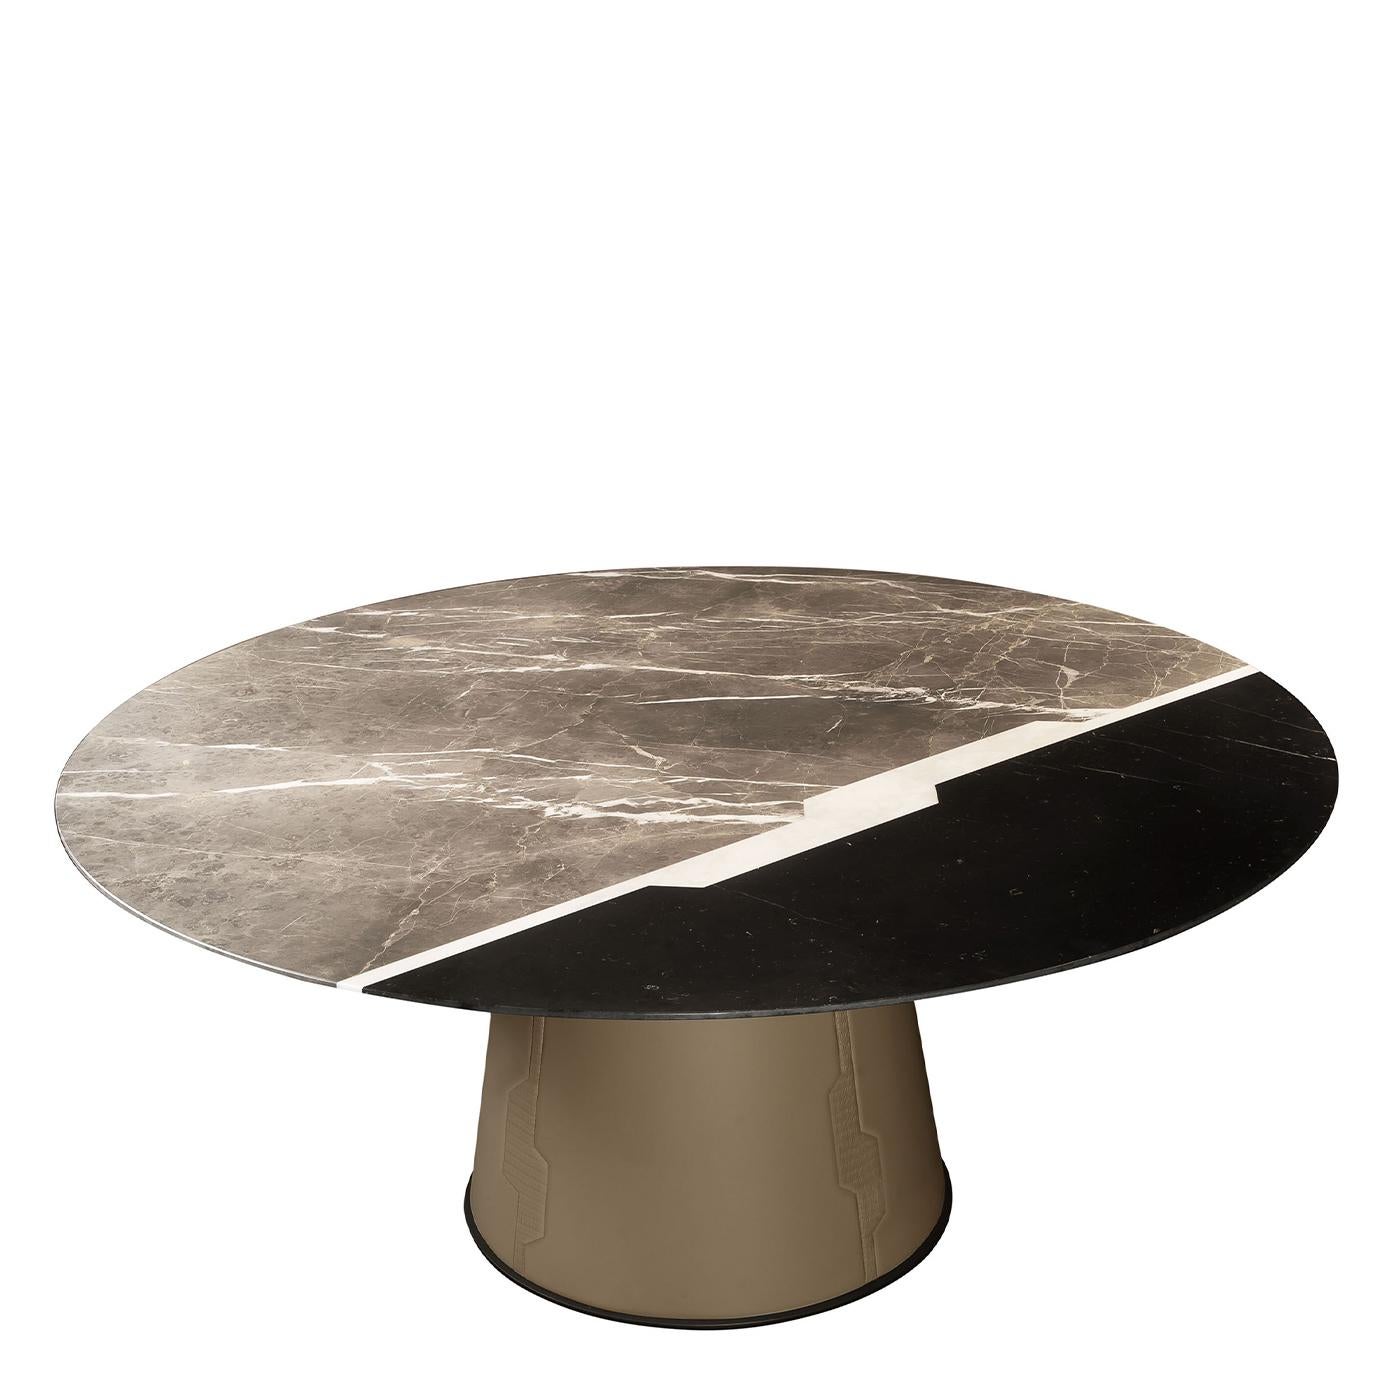 A celebration of the essential elegance of marble, this magnificent dining table is a superlative statement piece to complete a refined contemporary interior. Resting on a cone-shaped base made of poplar plywood and covered with smooth and printed